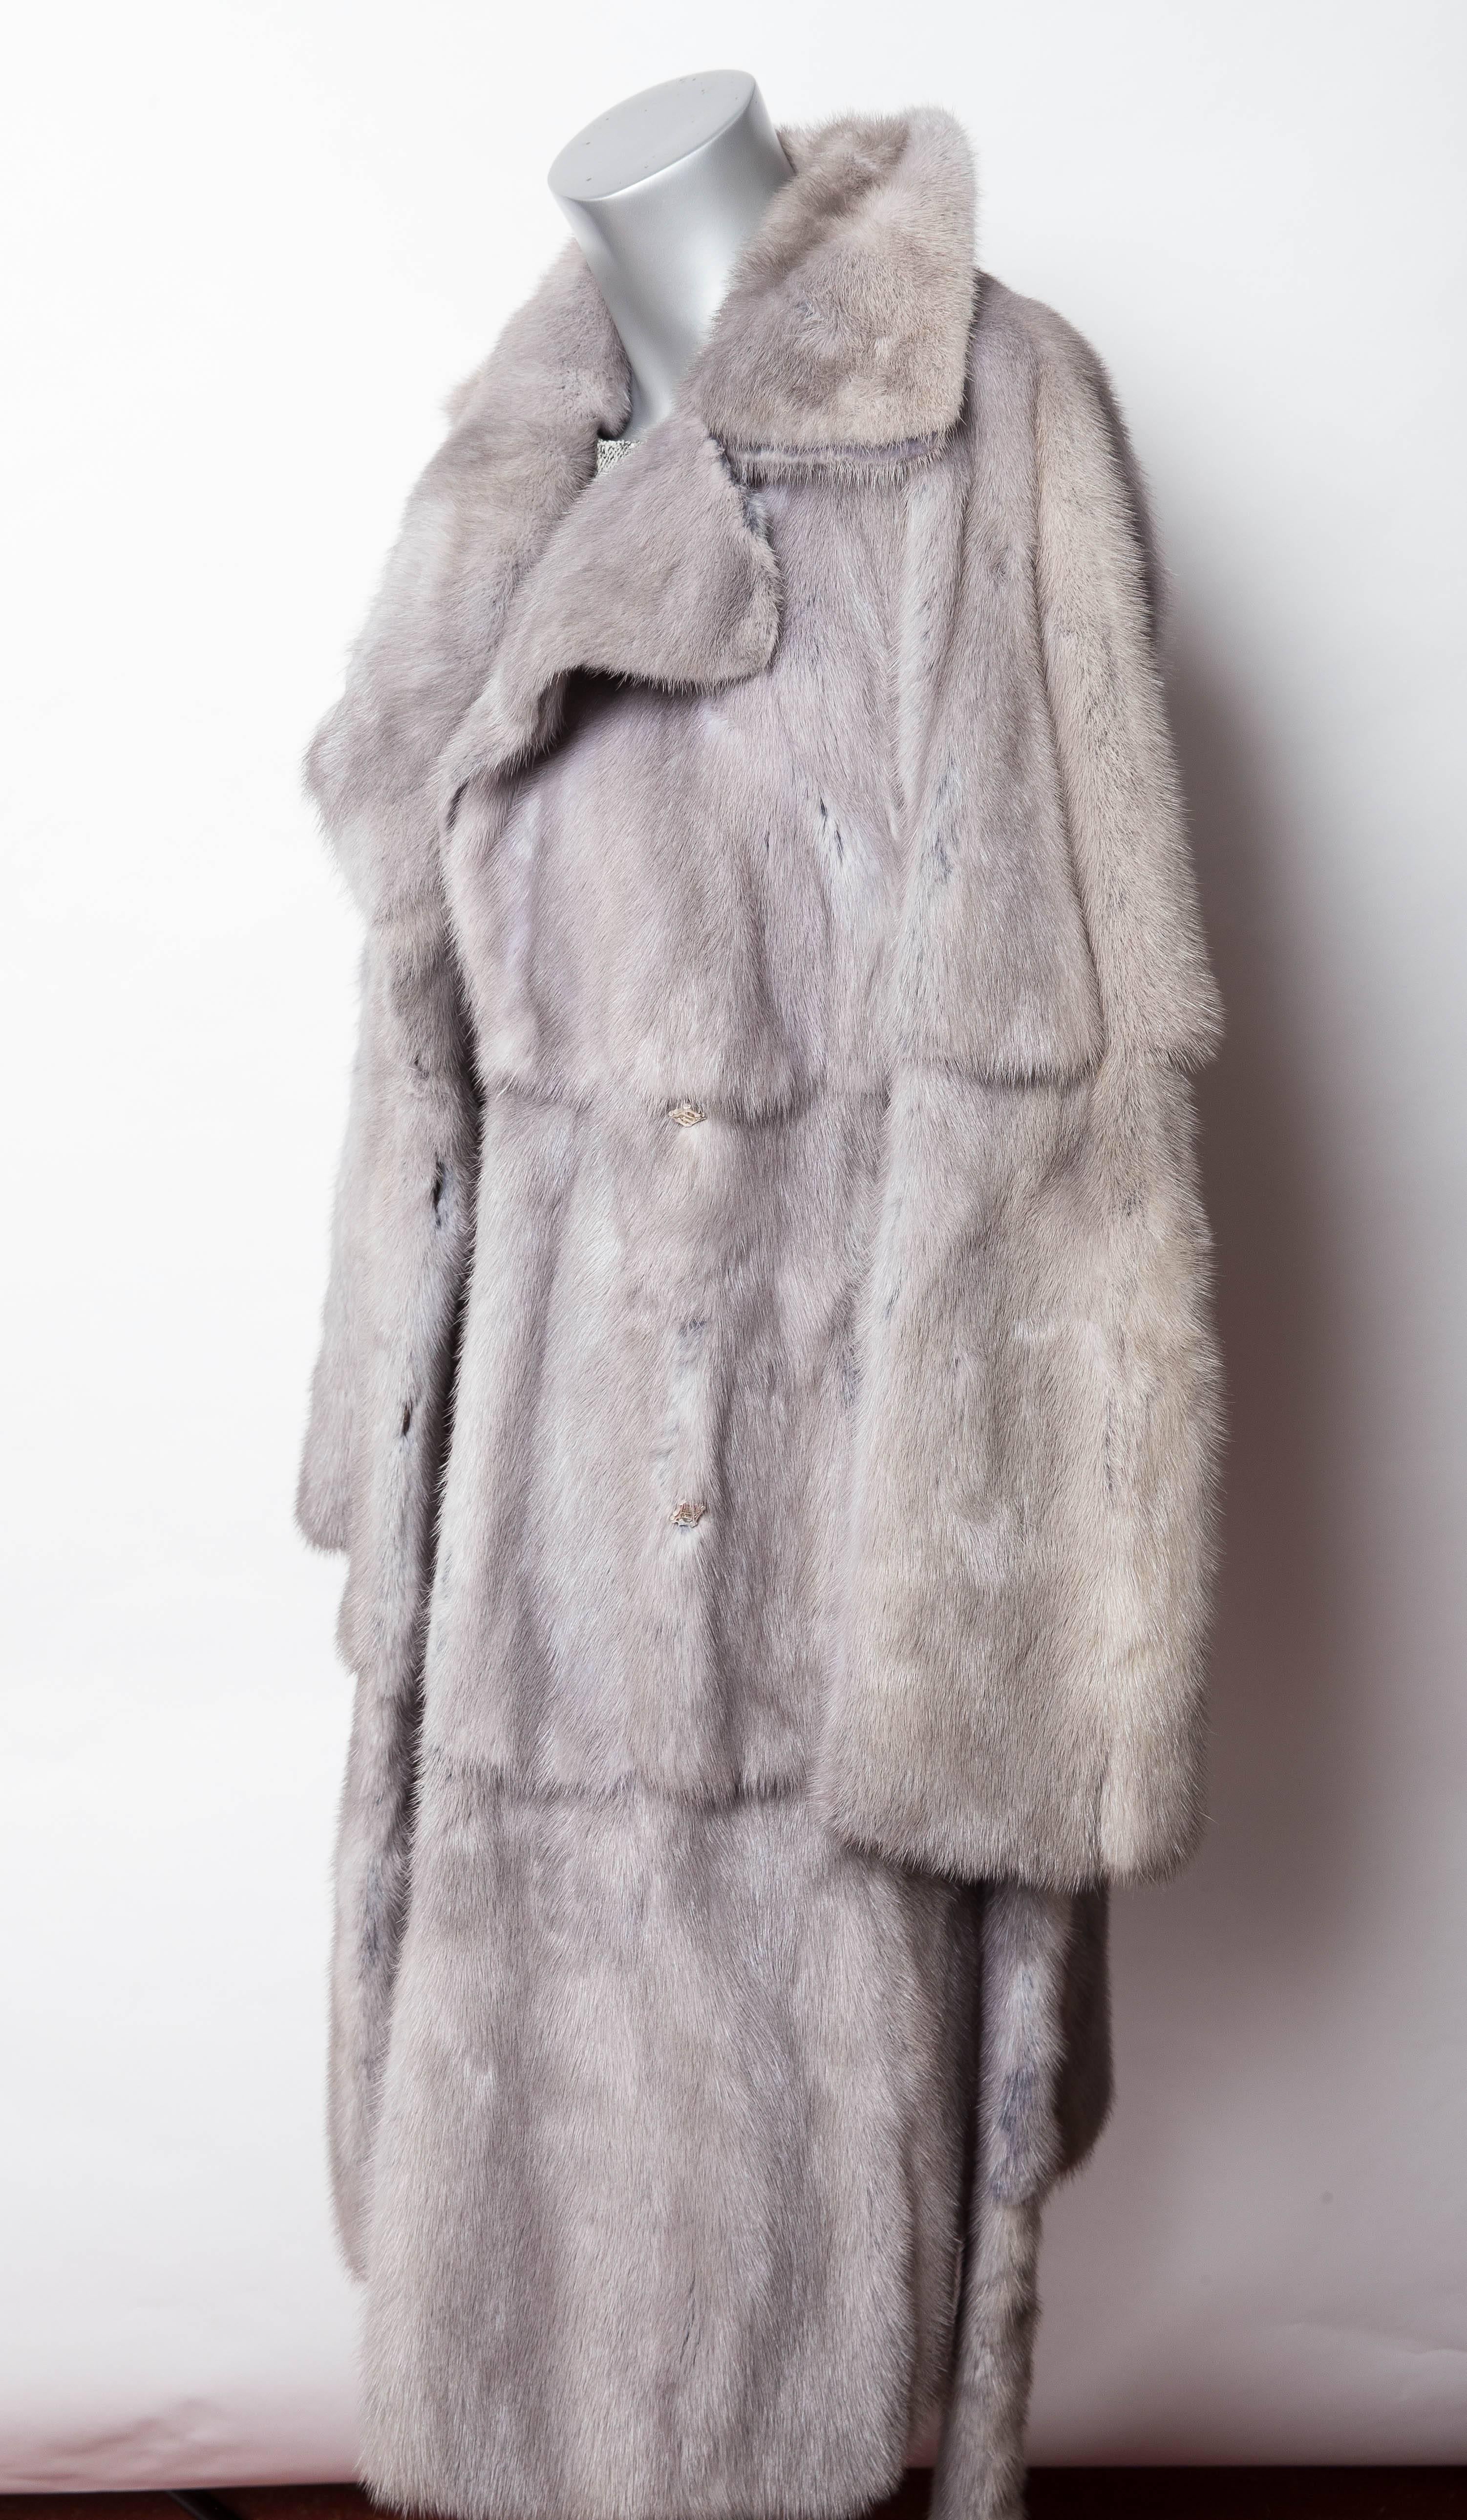 Stunning Fendi Mink Coat with Blue Suede Lined Double Lapels and Mink Belt.
The base of the mink is dyed blue so that a hint of color appears when the mink is brushed.
The double flap lapels have an inner lining of blue suede so that once again,